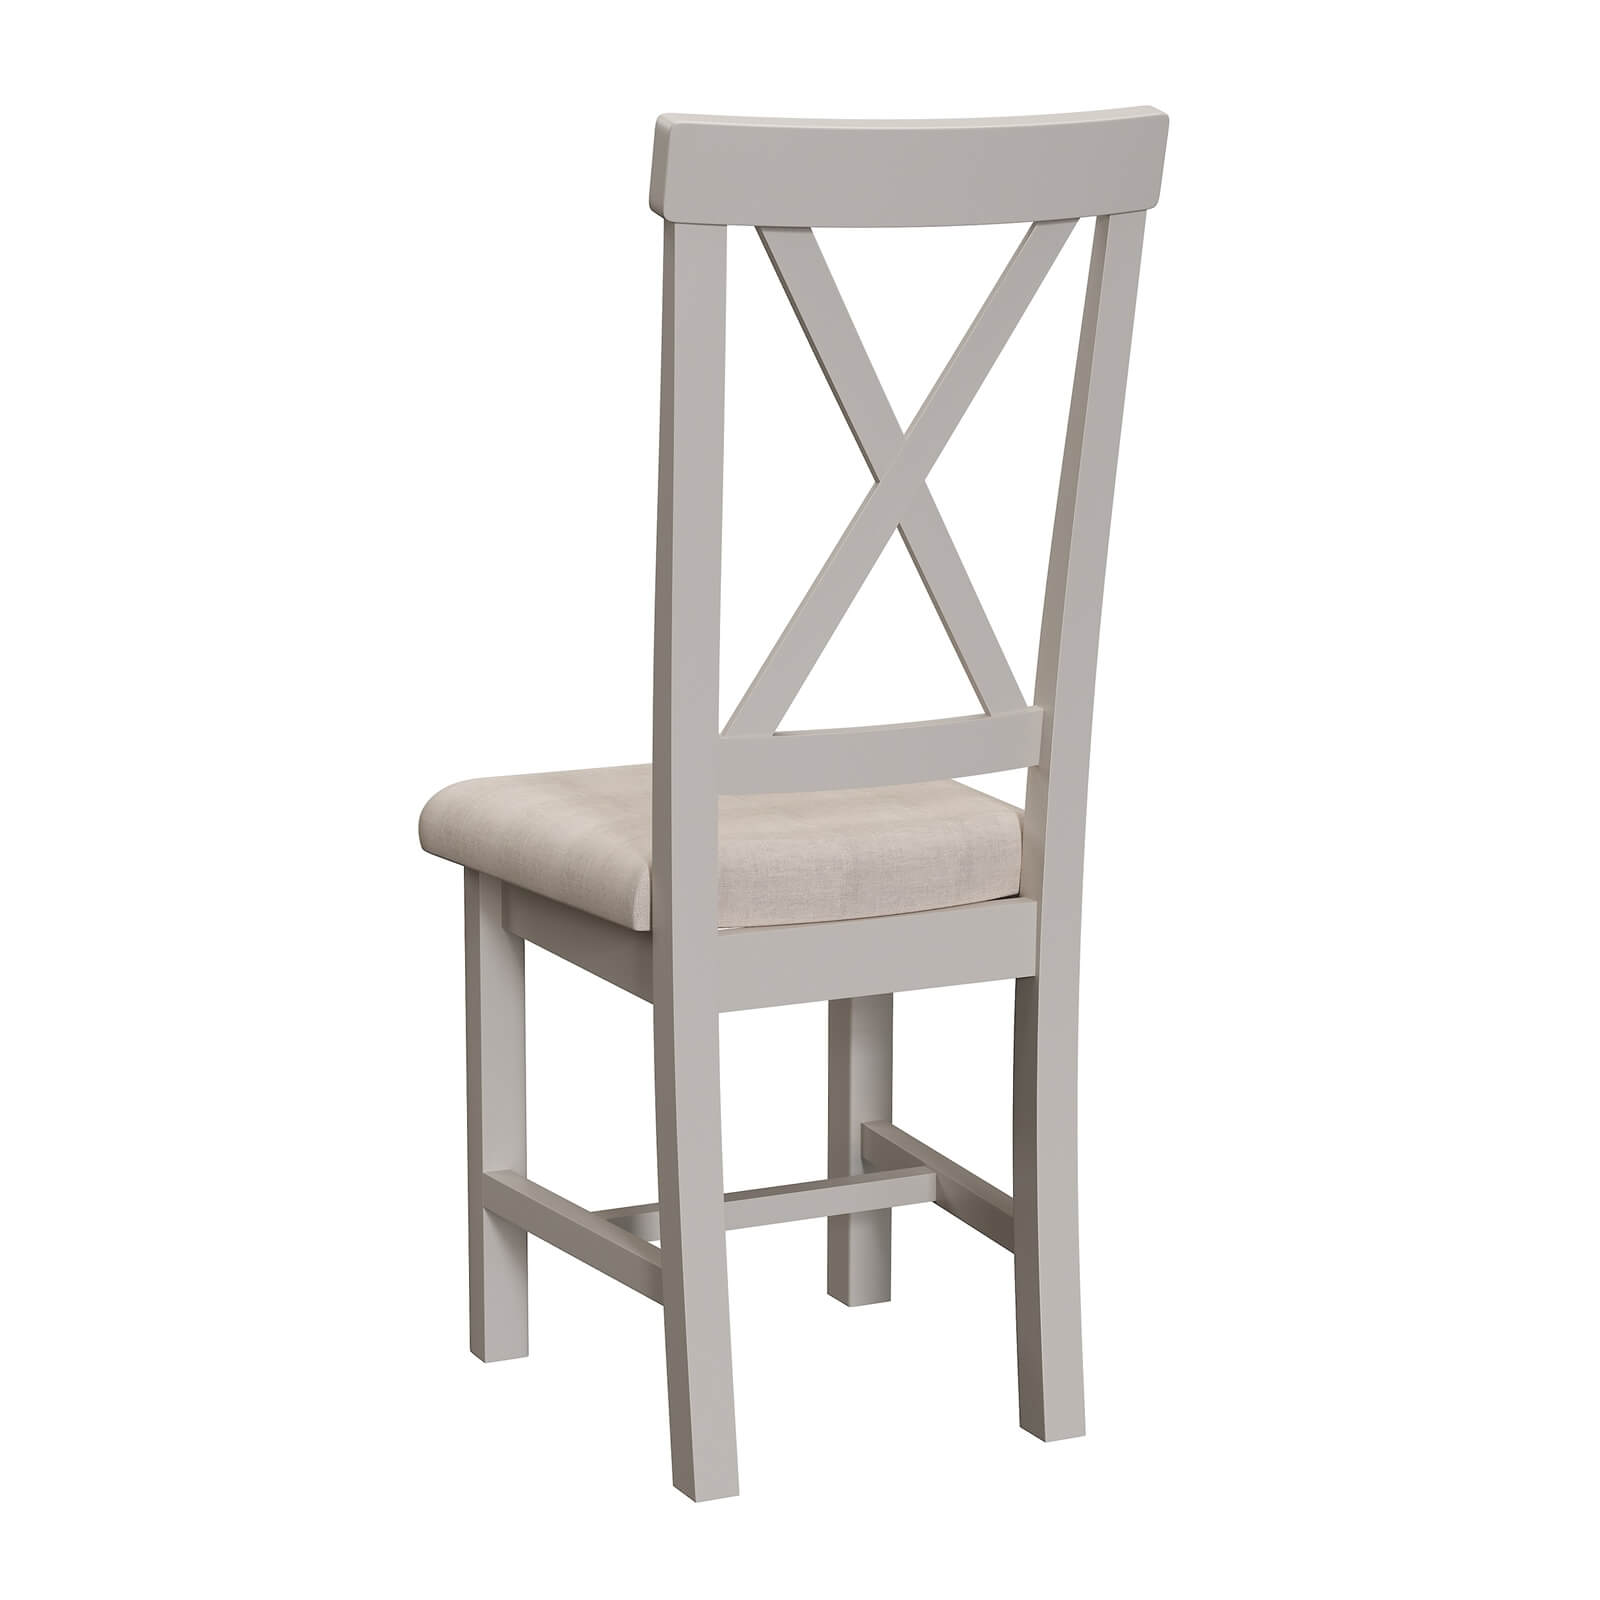 Padstow Upholstered Cross Back Dining Chair - Set of 2 - Truffle